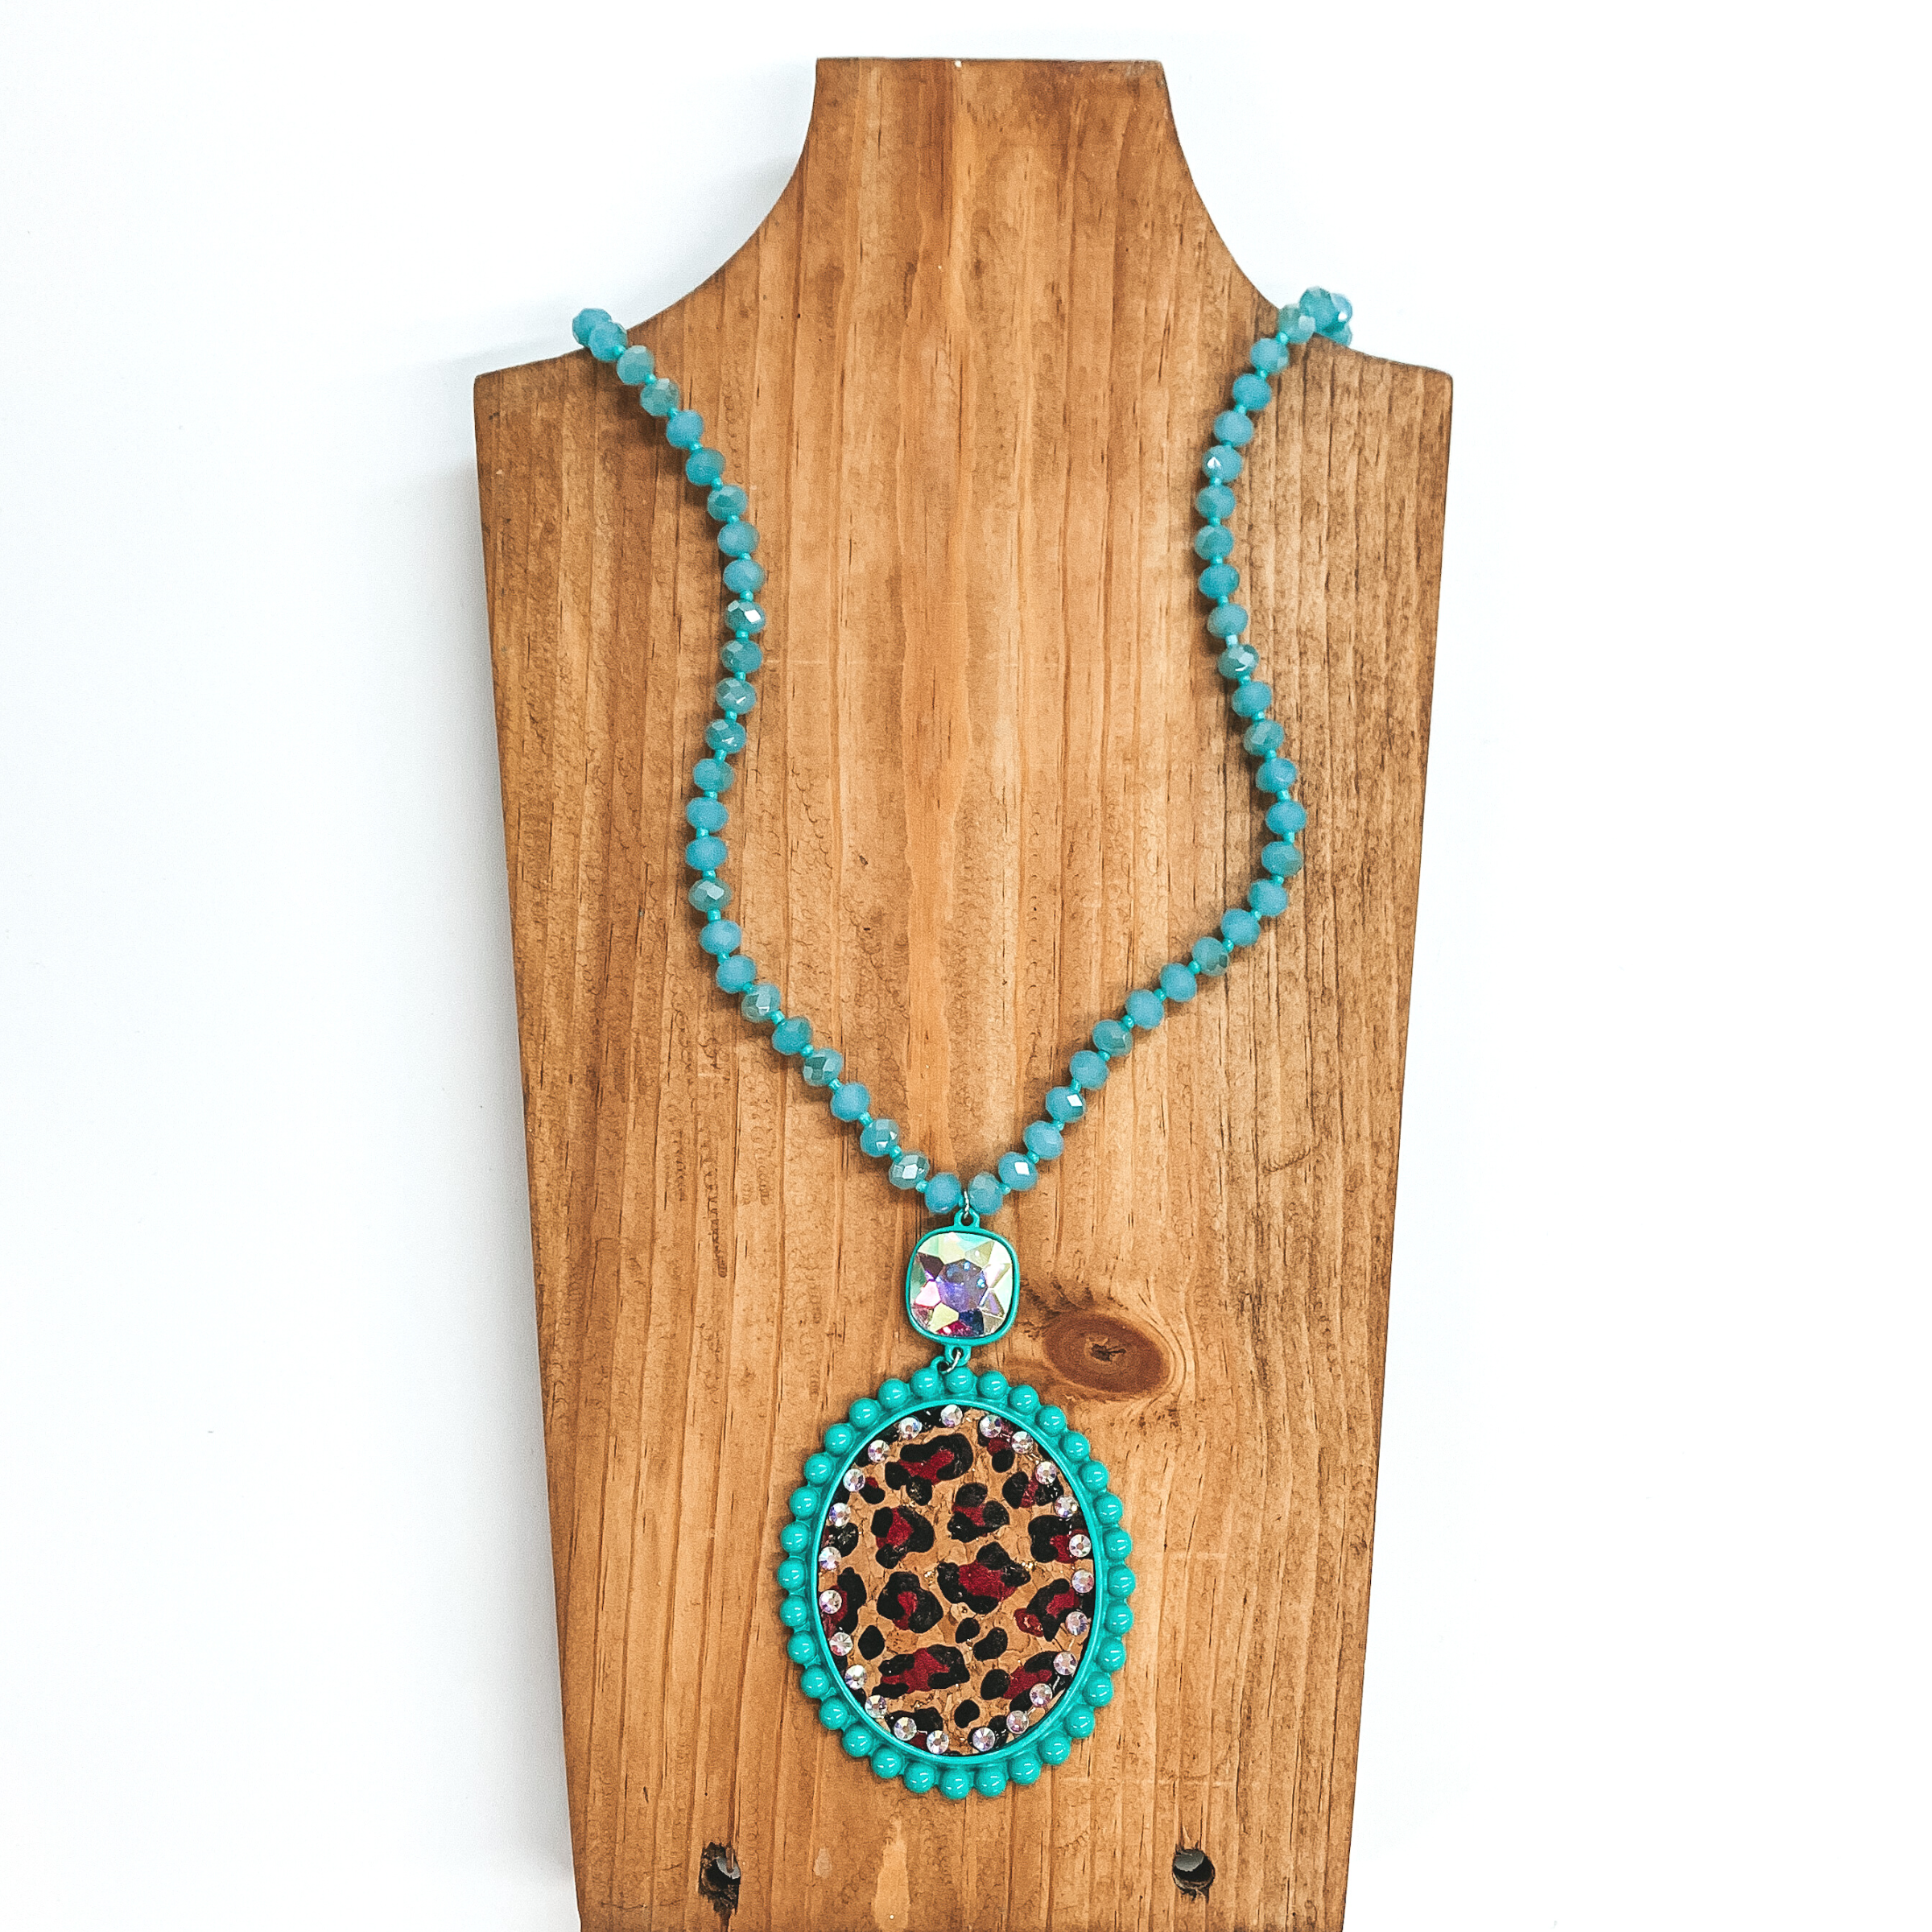 Long crystal beaded necklace in turquoise with a leopard print pendant  and AB cushion cut crystal connector. The pendant is in a turquoise setting,  the leopard print is on a cork material and has small AB crystals all  around. This necklace is taken laying on a brown necklace board and white  background.